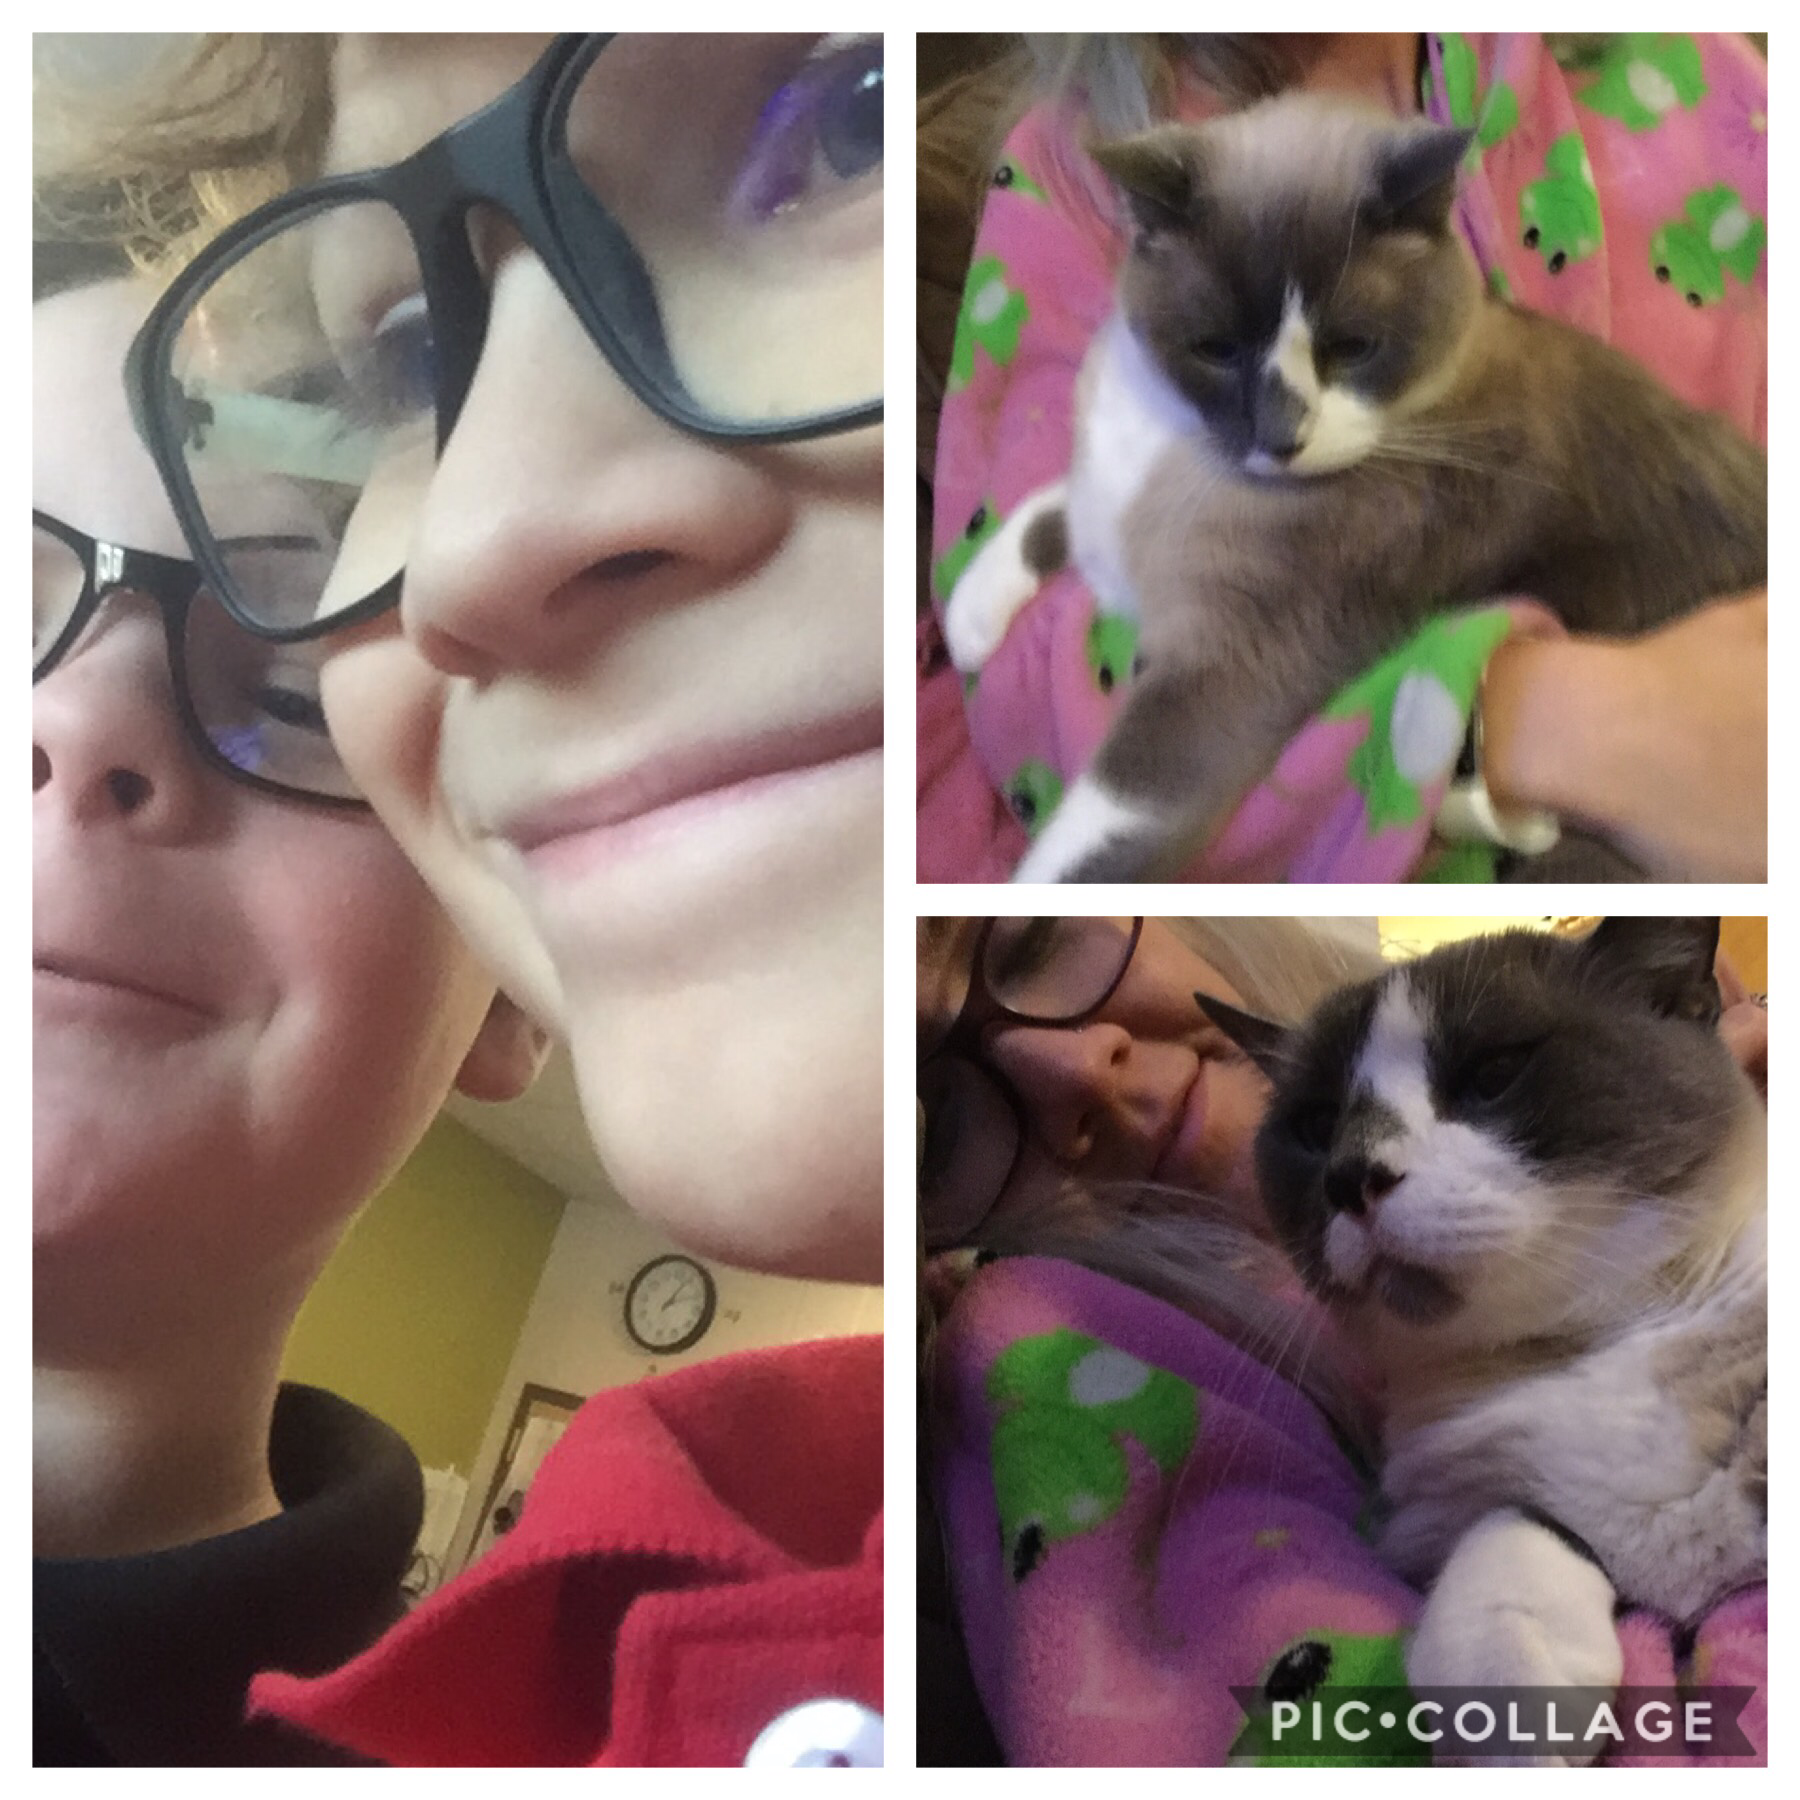 Me and my friend and my cat Frodo.